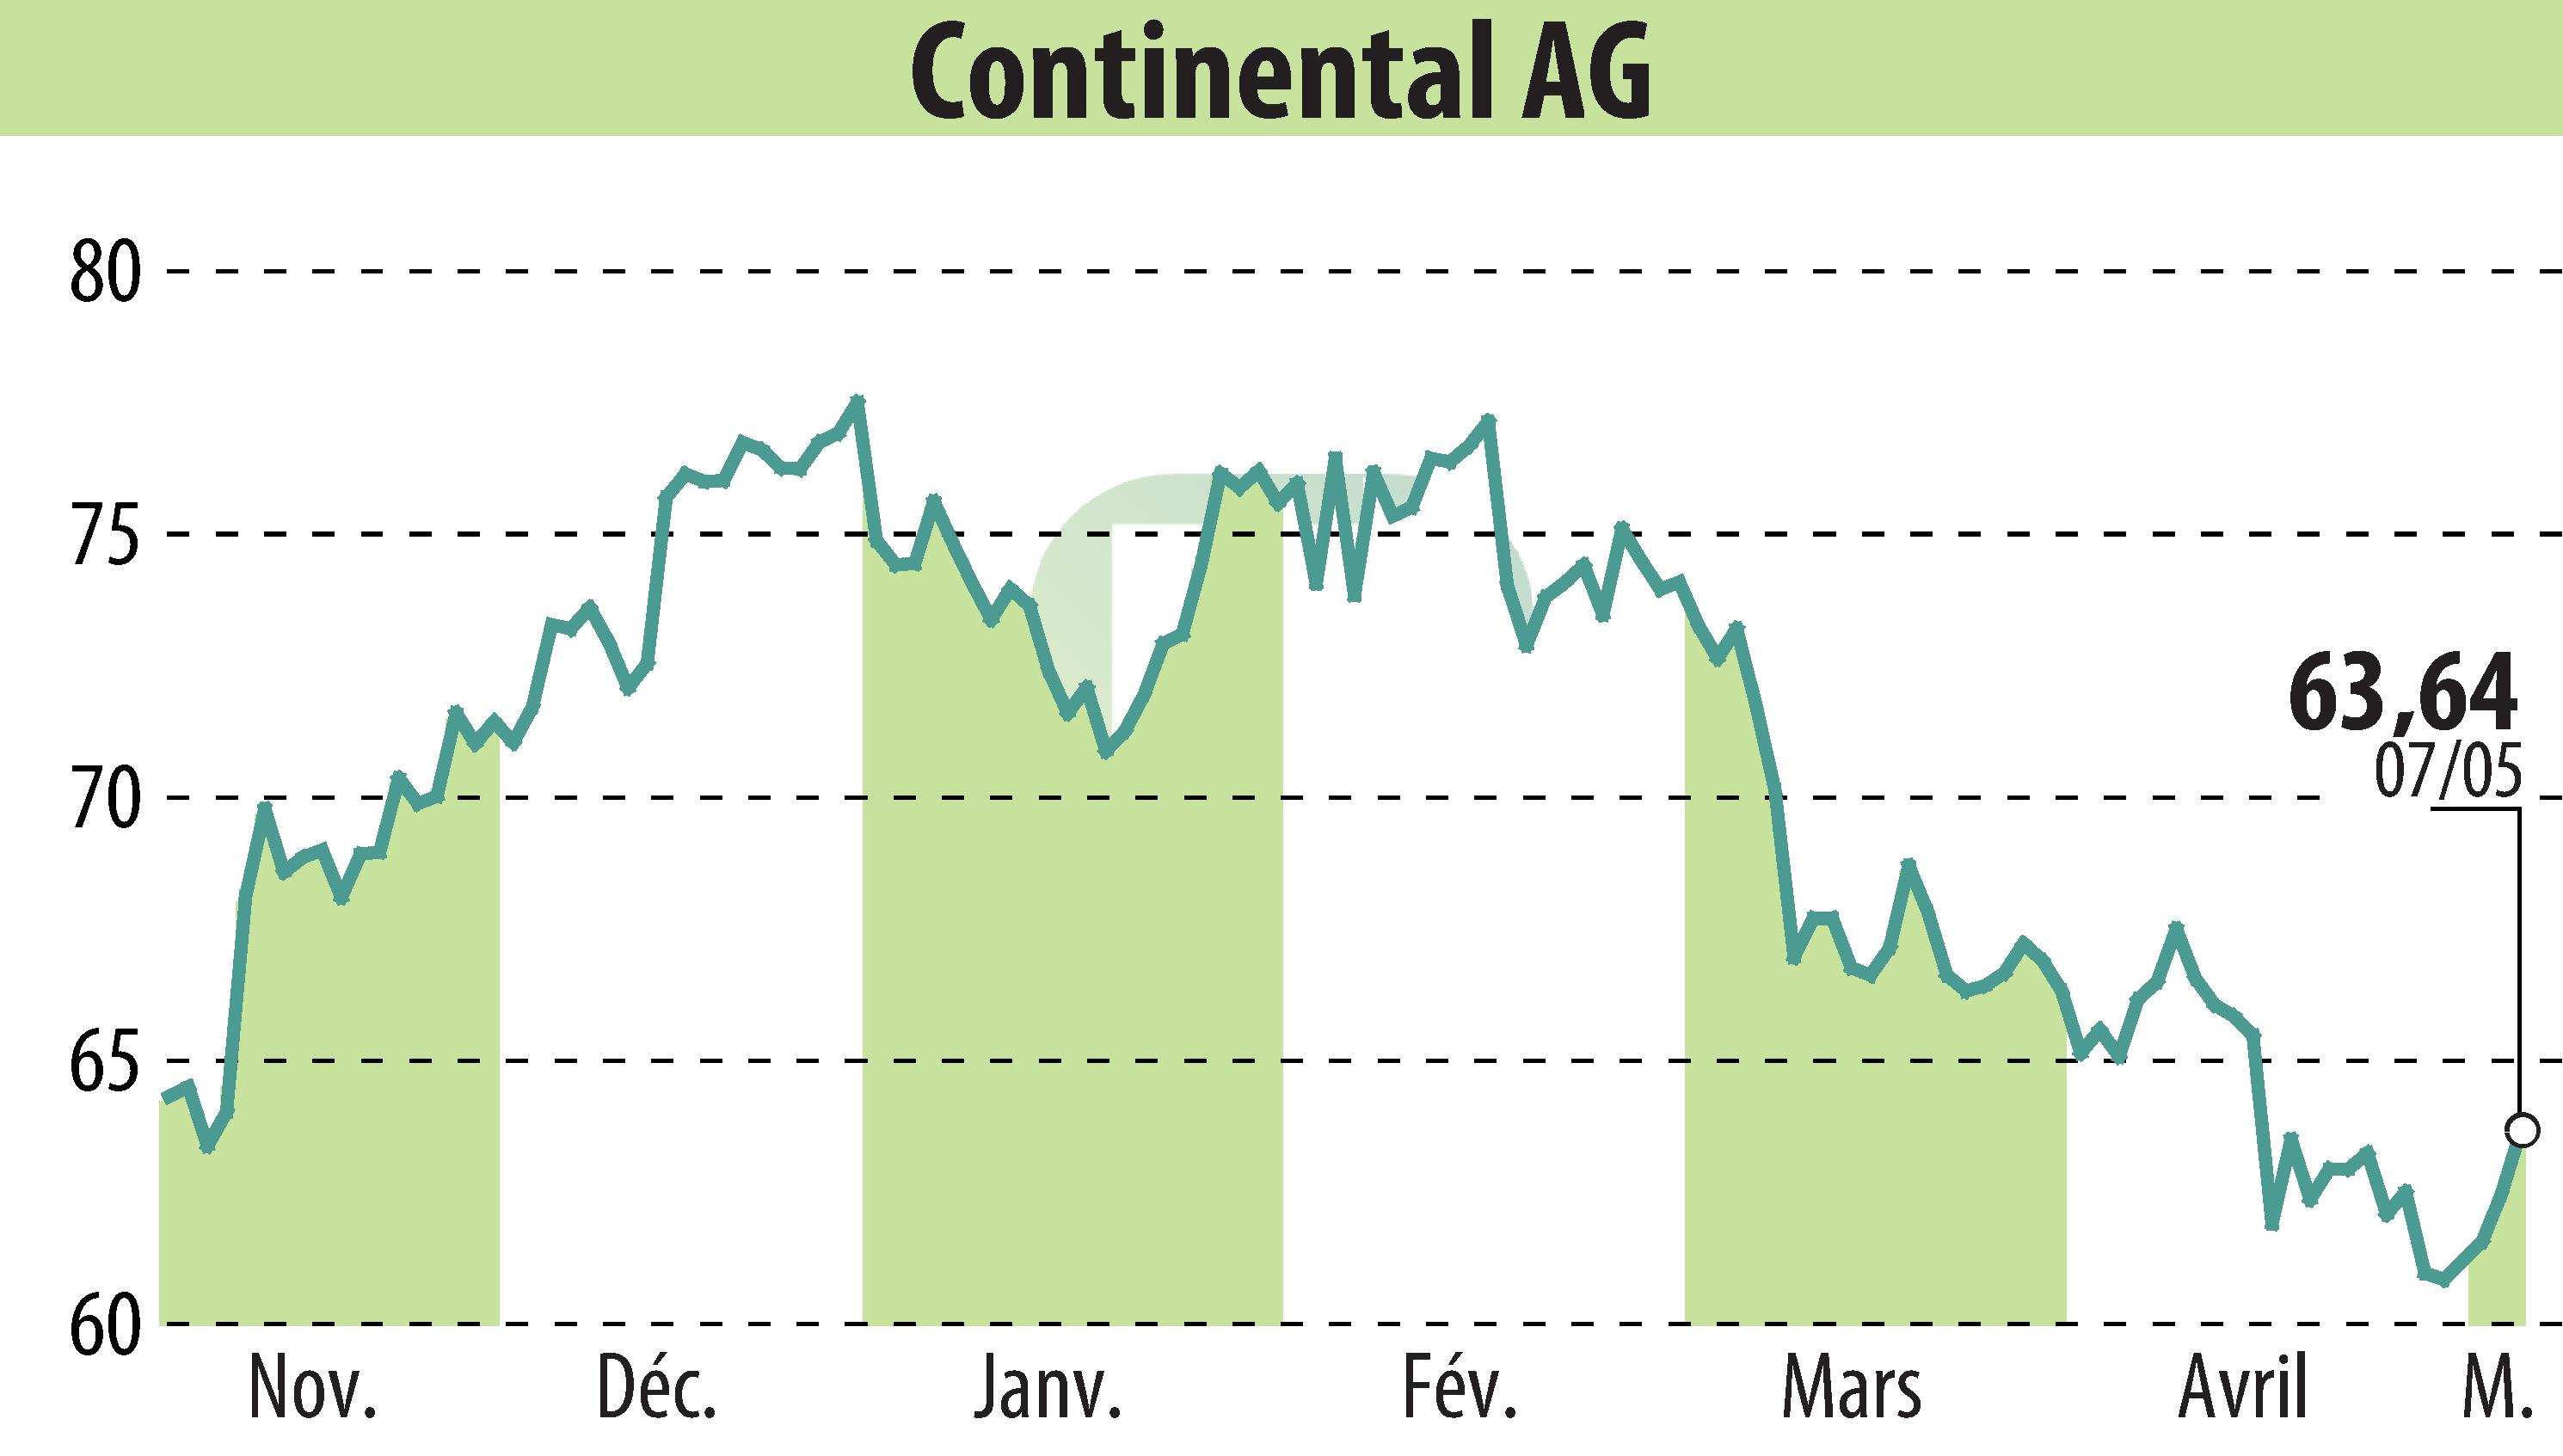 Stock price chart of Continental AG (EBR:CON) showing fluctuations.